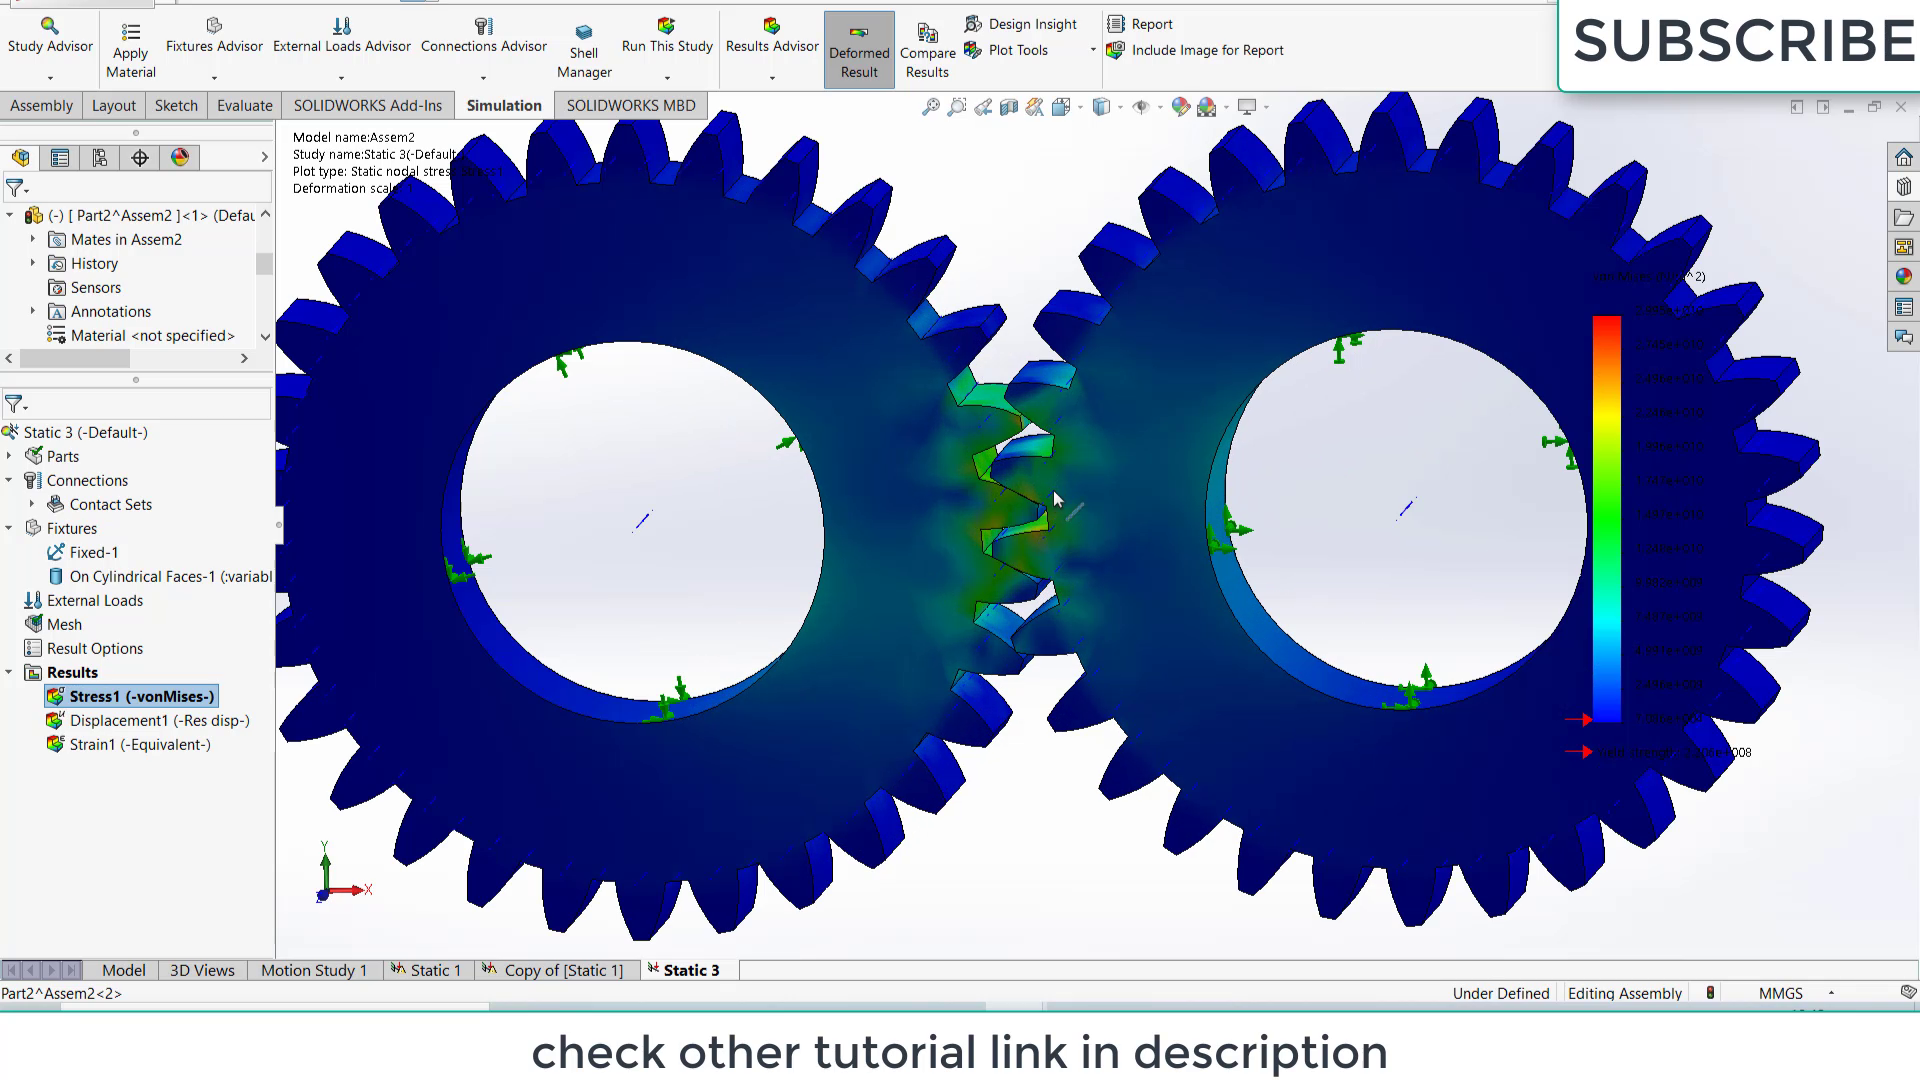 gears-simulator-download-for-free-getwinpcsoft